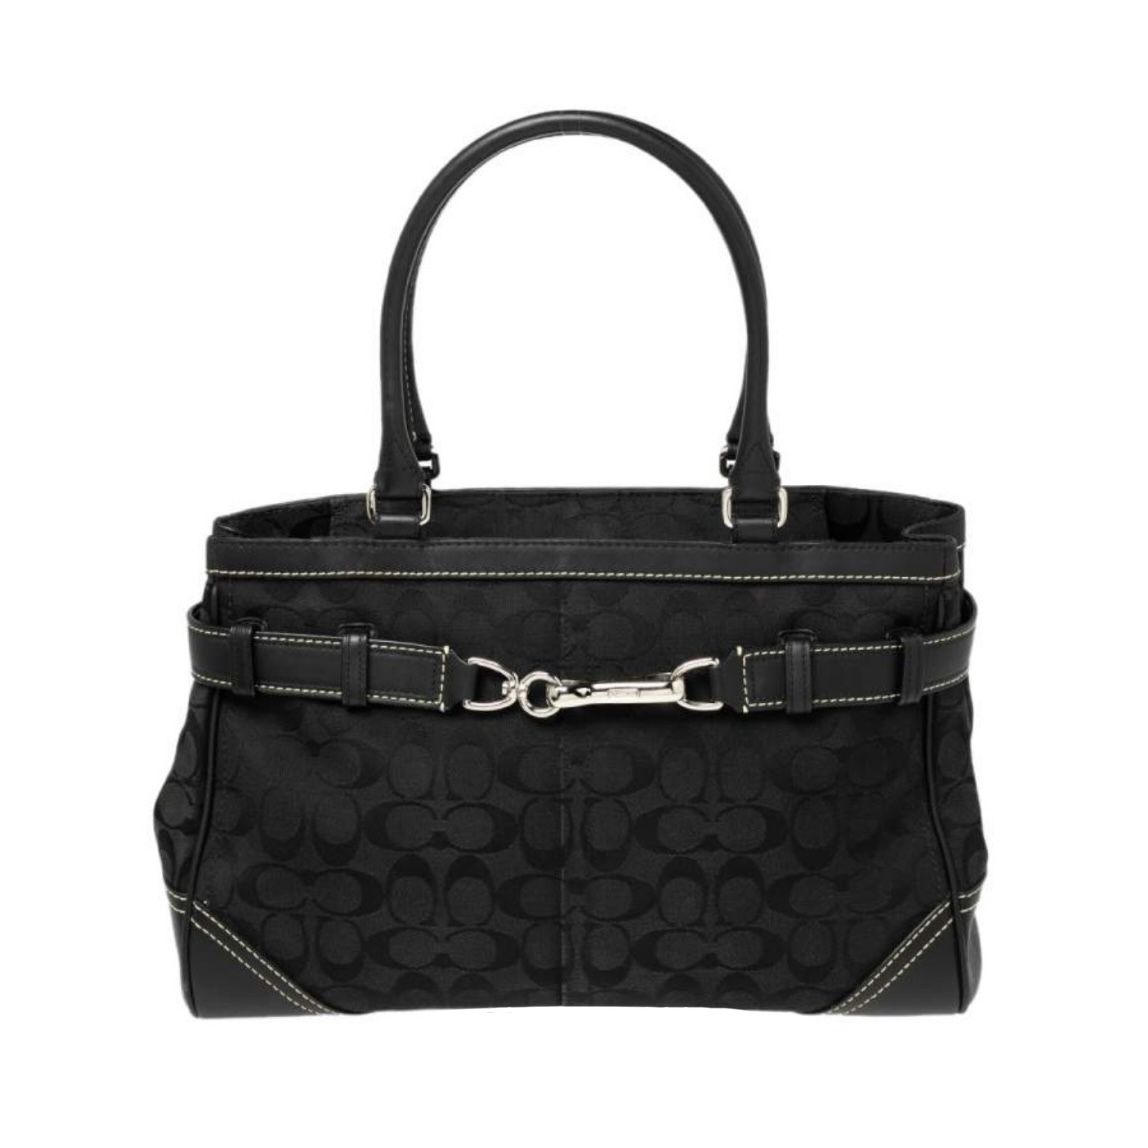 Coach Carryall Business Hamptons Signature 10246 Black Canvas Leather Tote